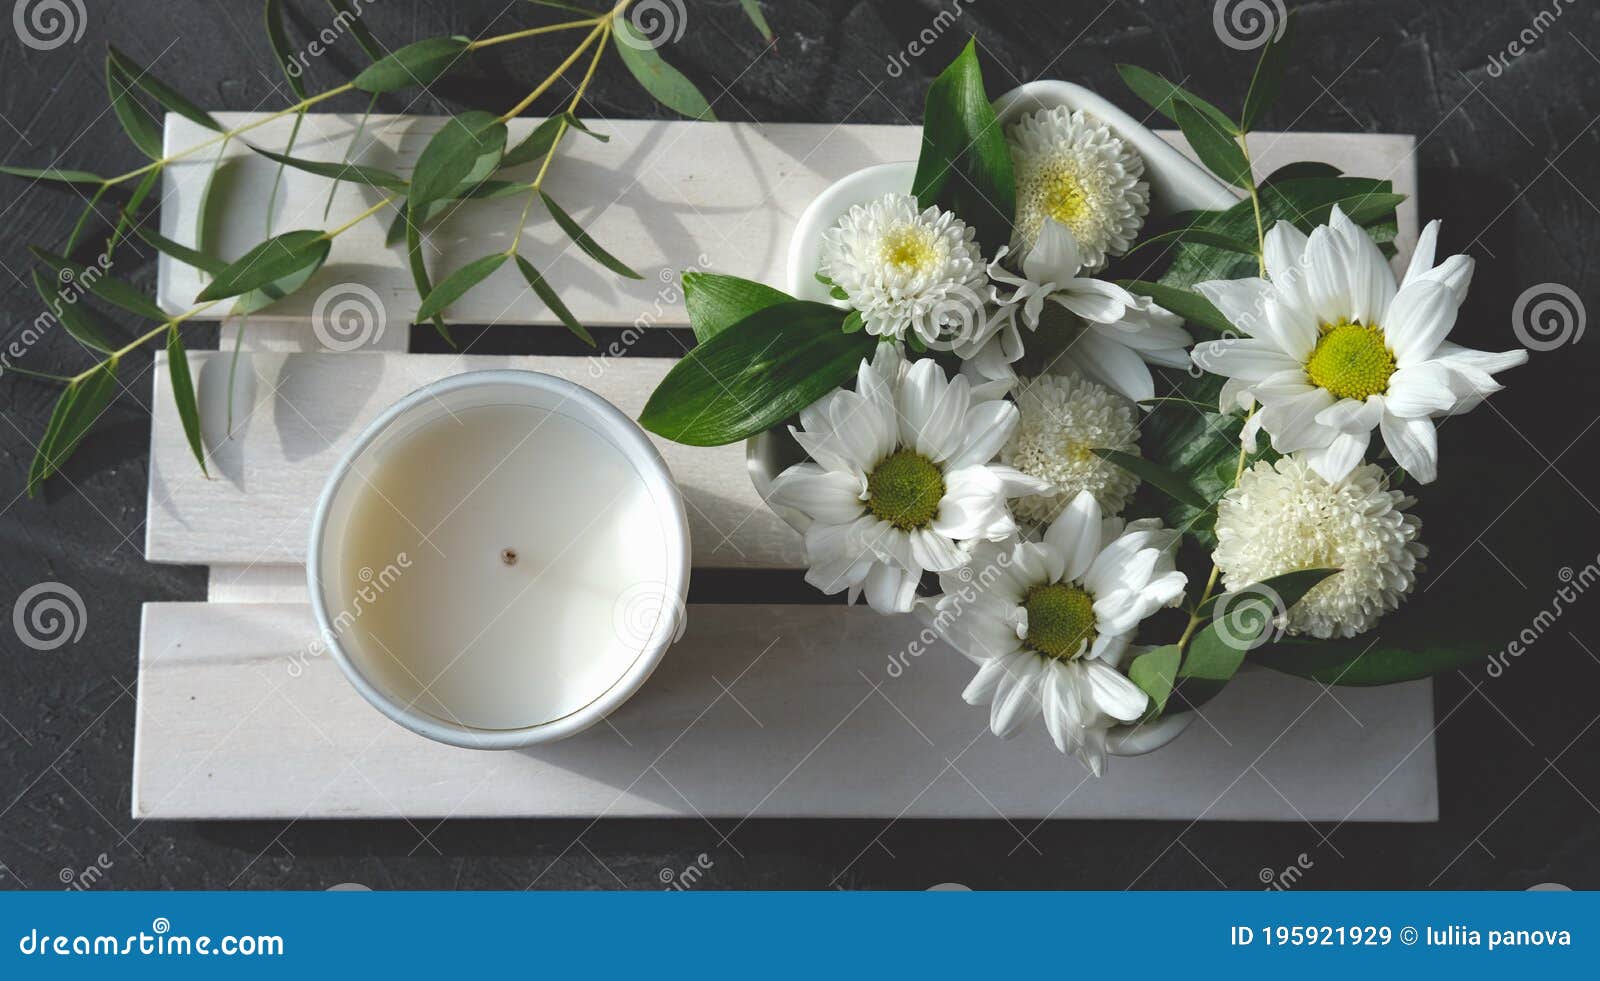 white scented candle and delicate flowers